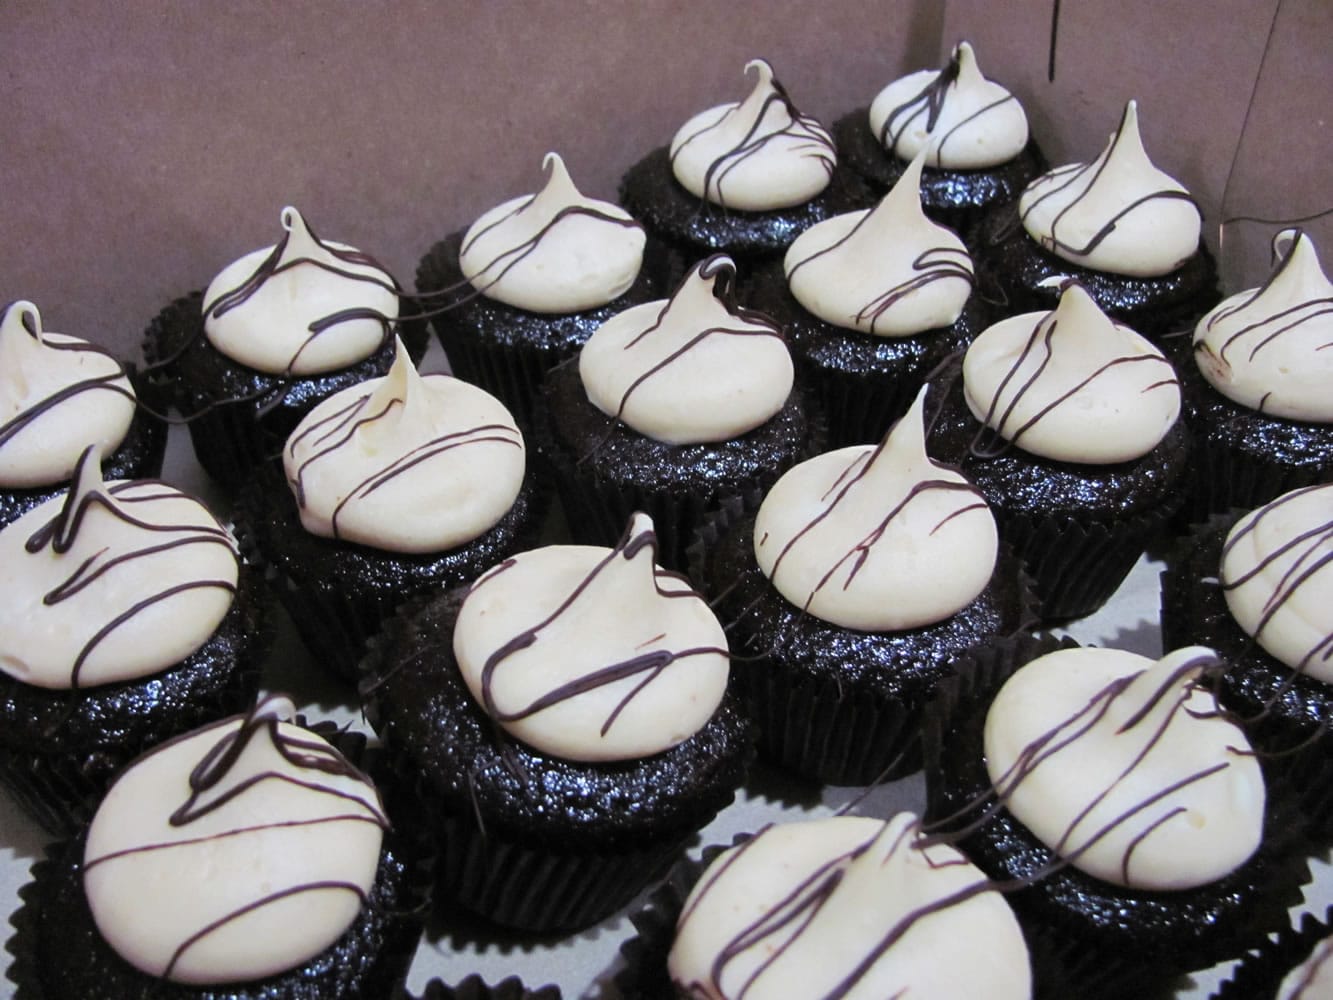 Cupcakes from Cake Happy are available to eat on site or to go.